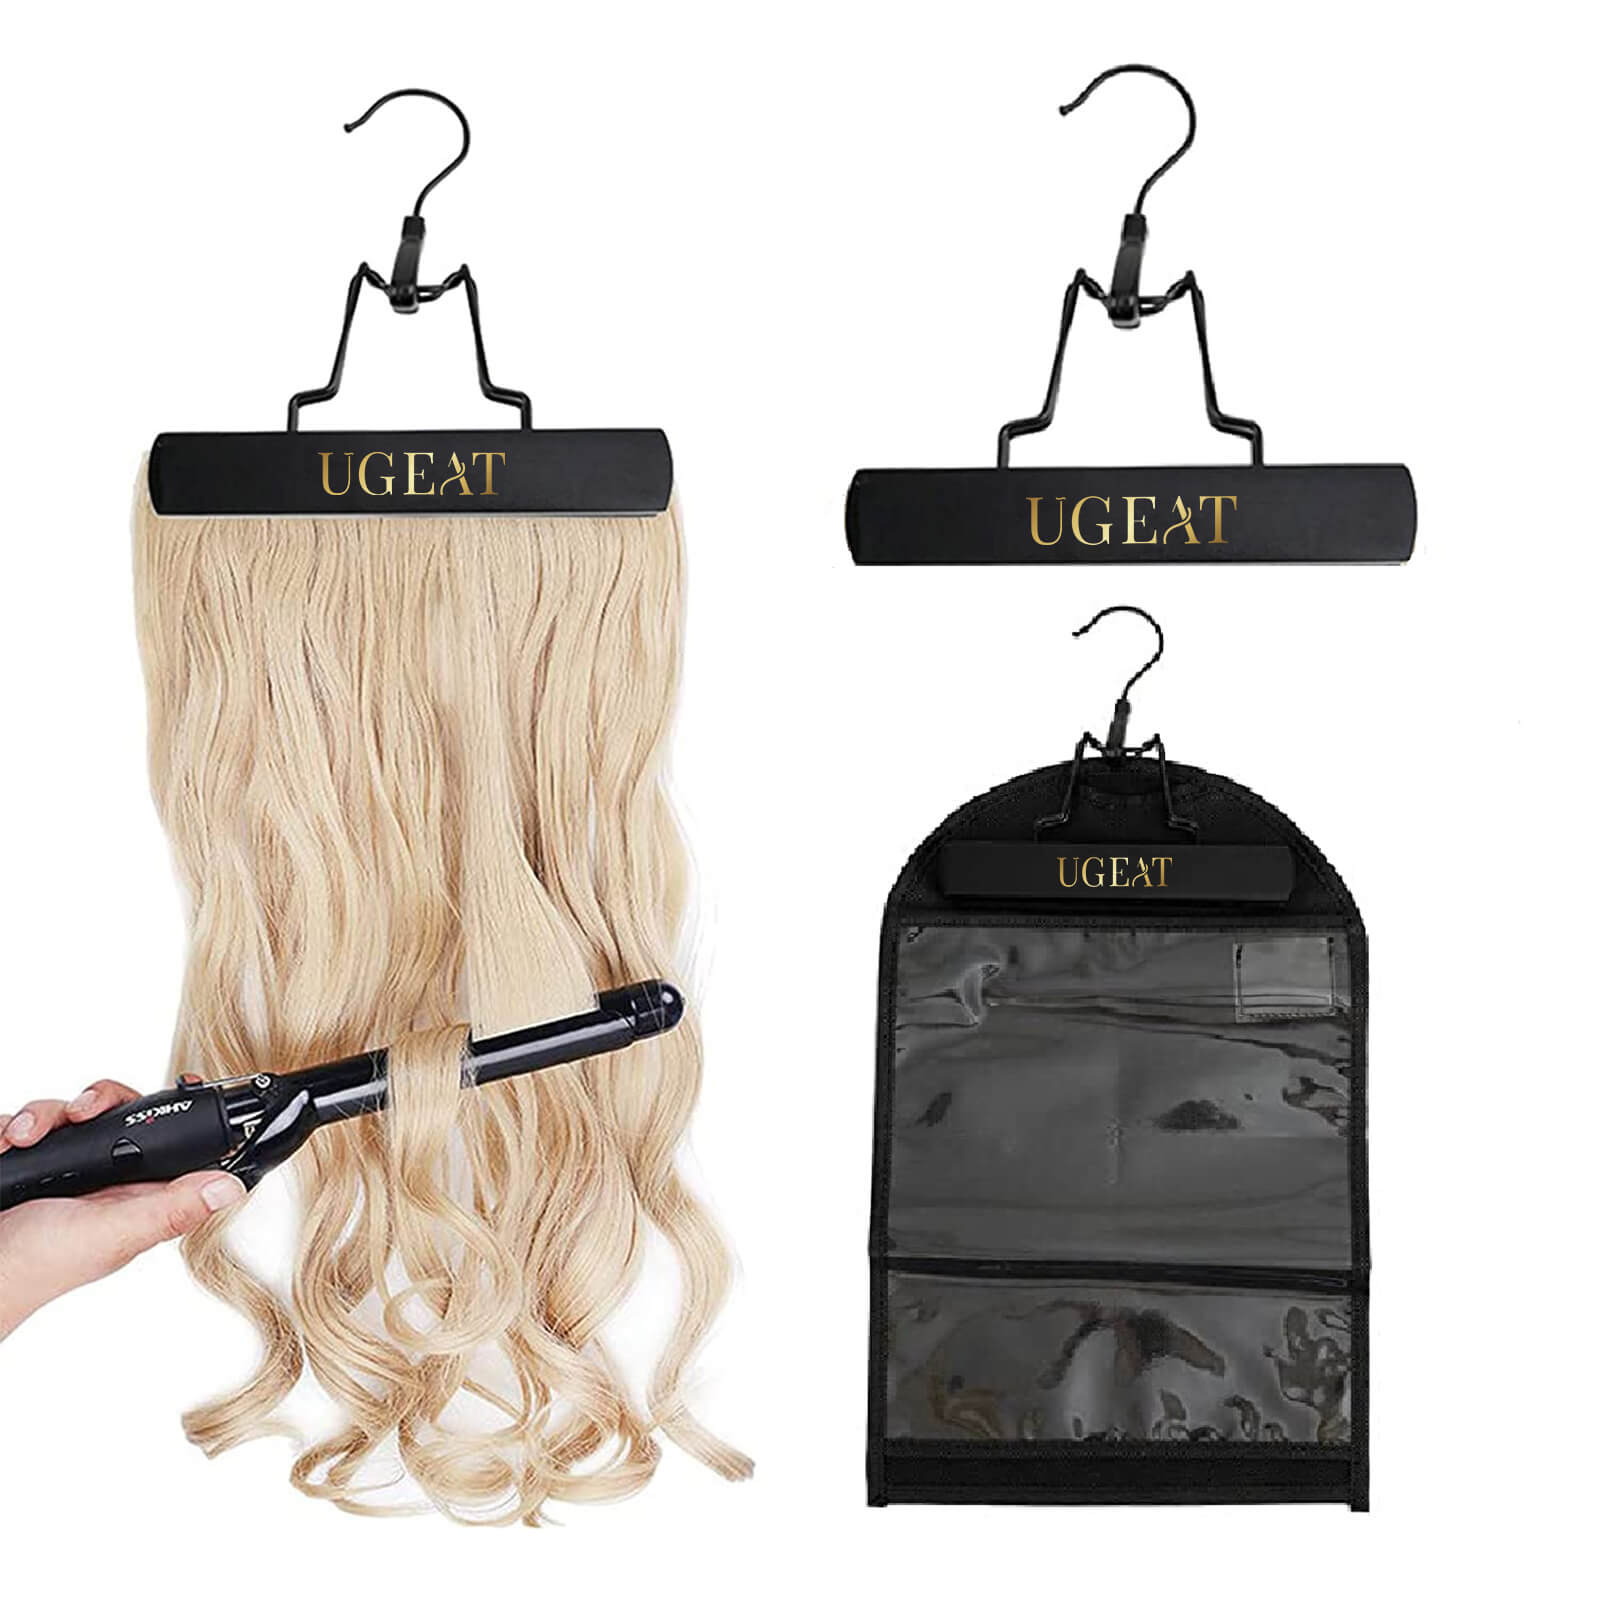 hair extensions holder with storage bag ugeat